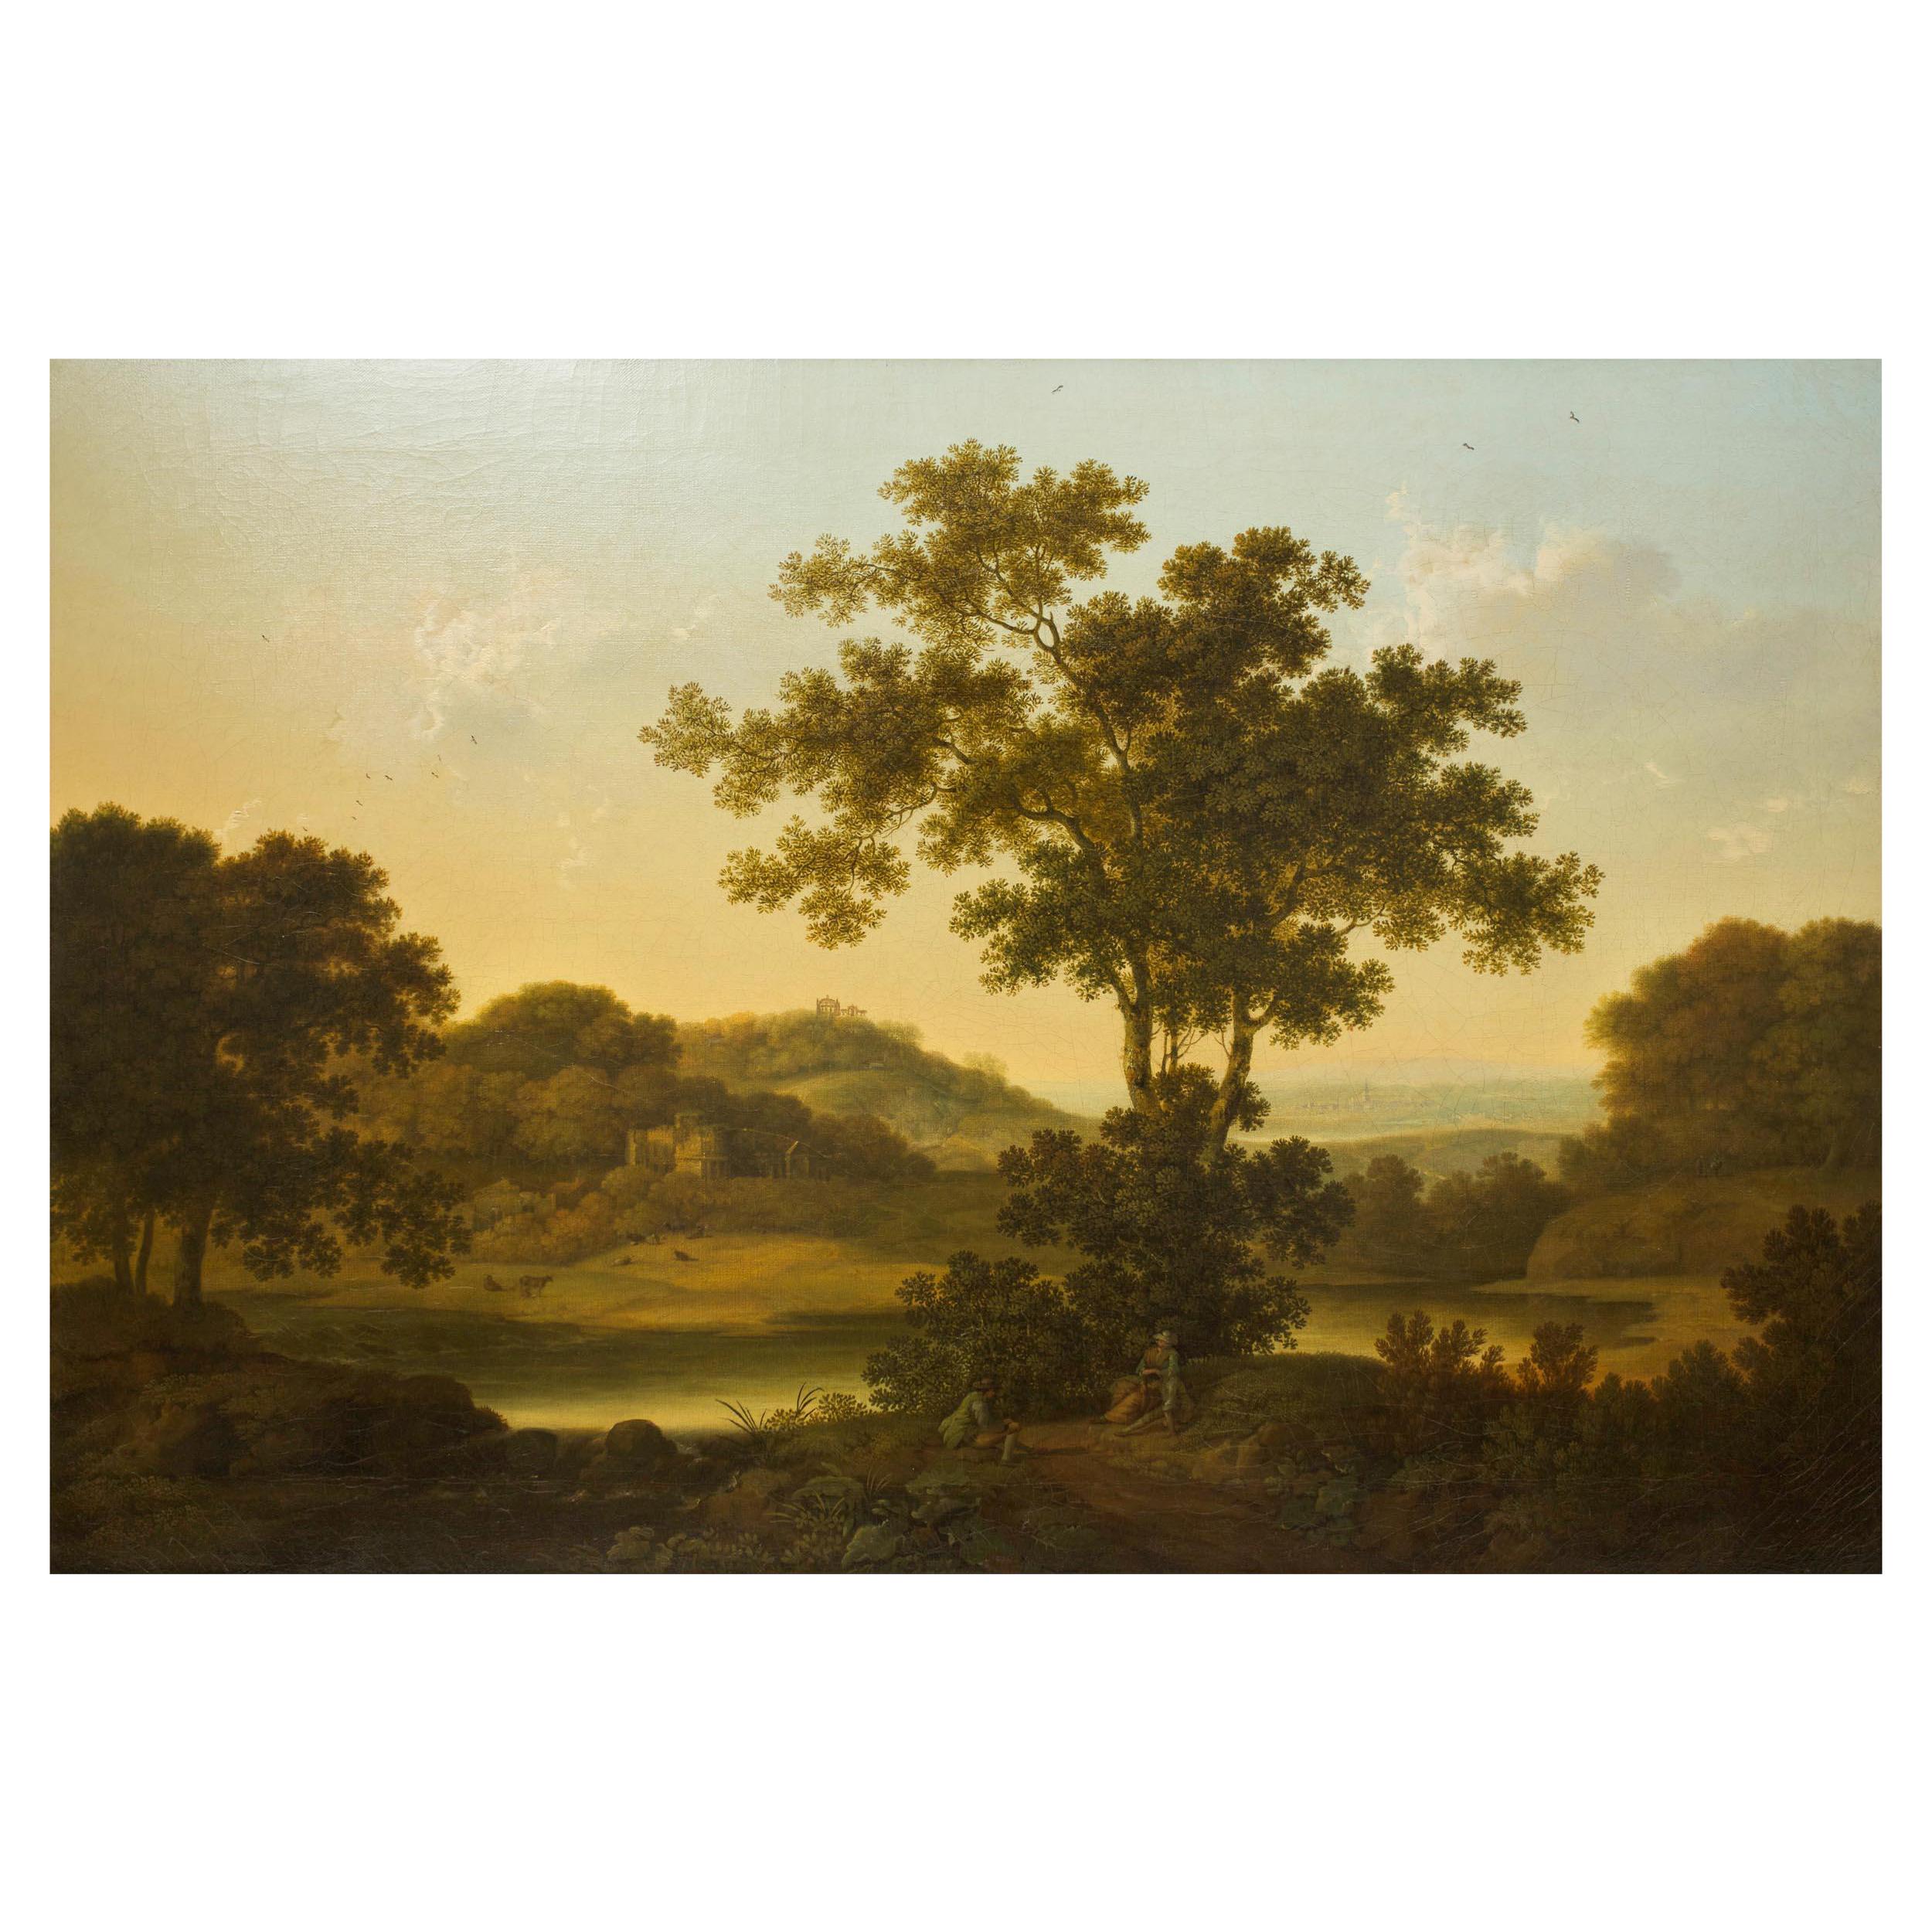 English Landscape Painting of "Travelers Resting" by George Smith of Chichester